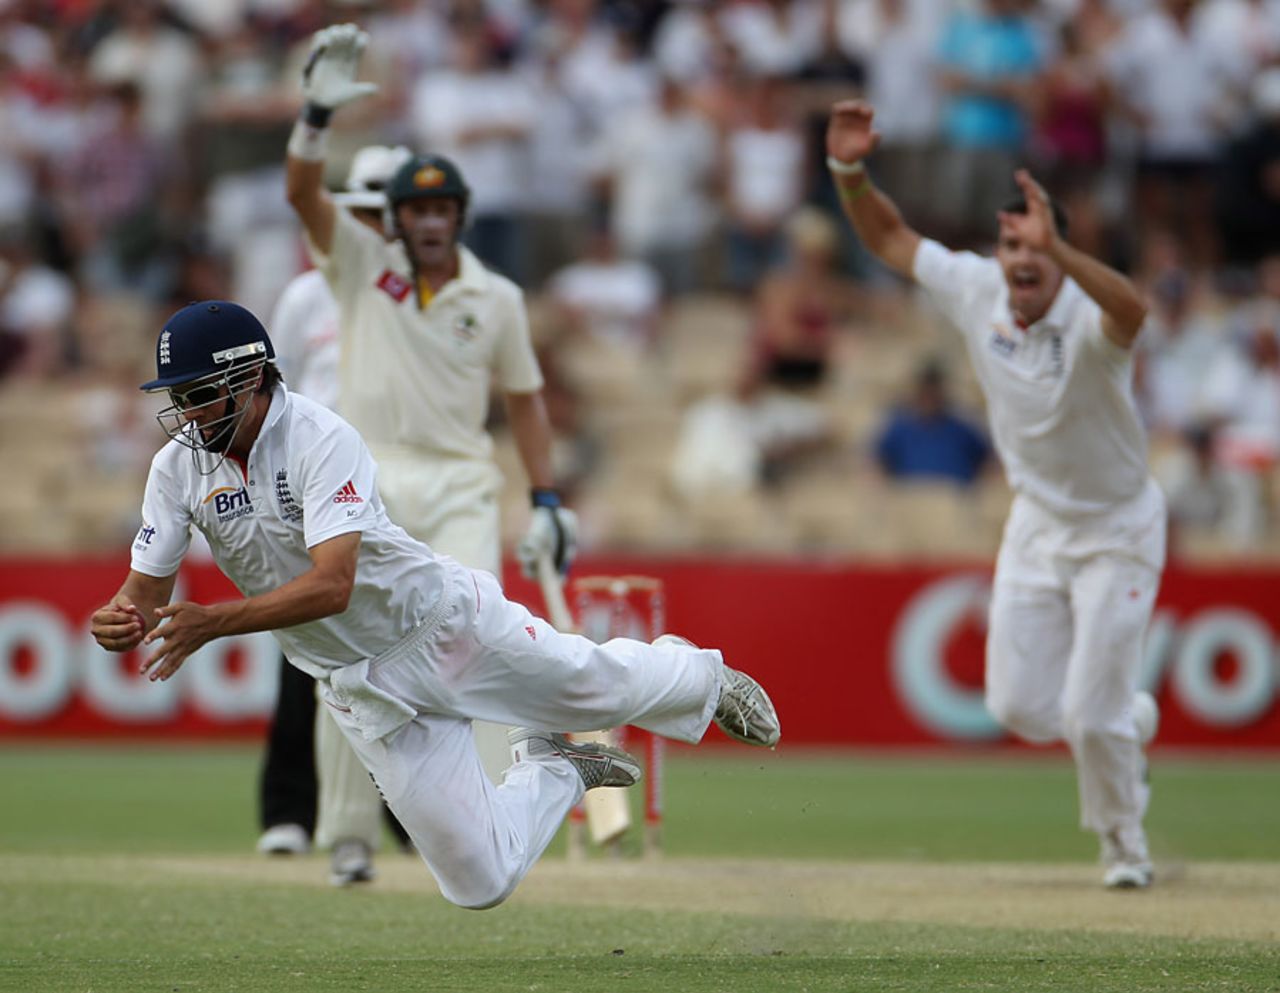 Alastair Cook dives to catch Michael Clarke, Australia v England, 2nd Test, Adelaide, 4th day, December 6, 2010